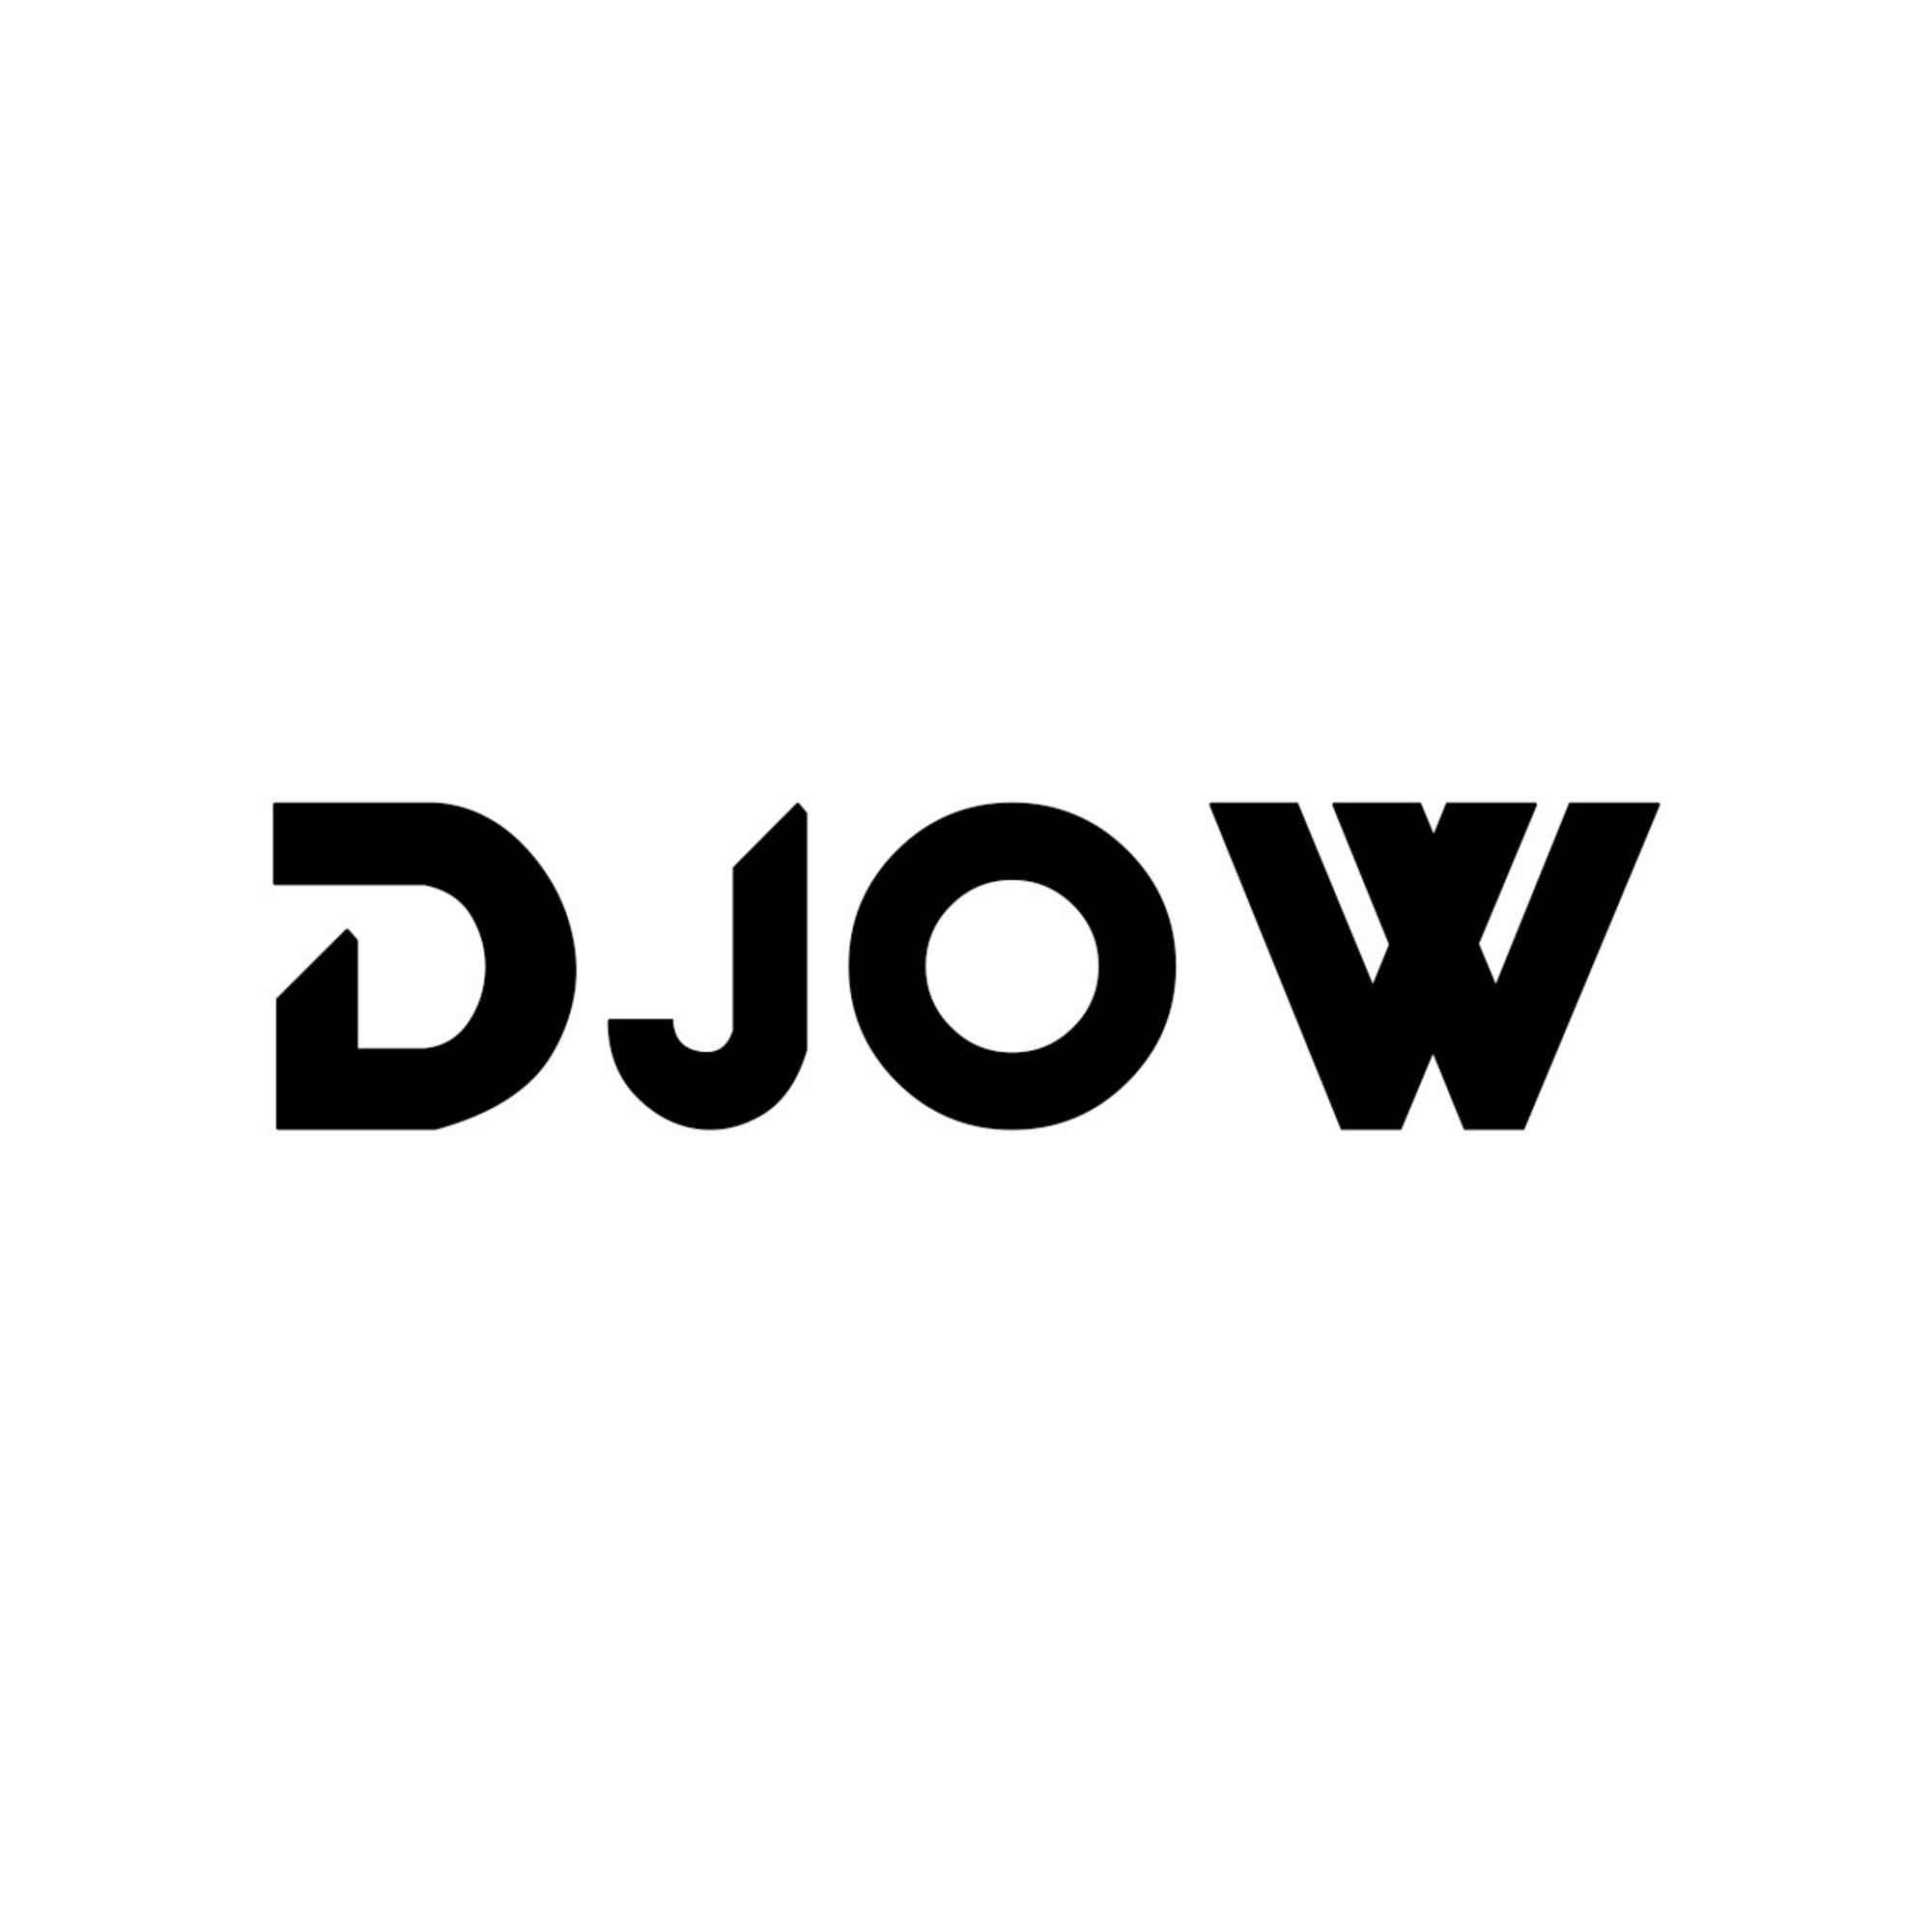 DJOW makes his Mark Prominent in the World of Music as a Growing DJing Talent and Performer